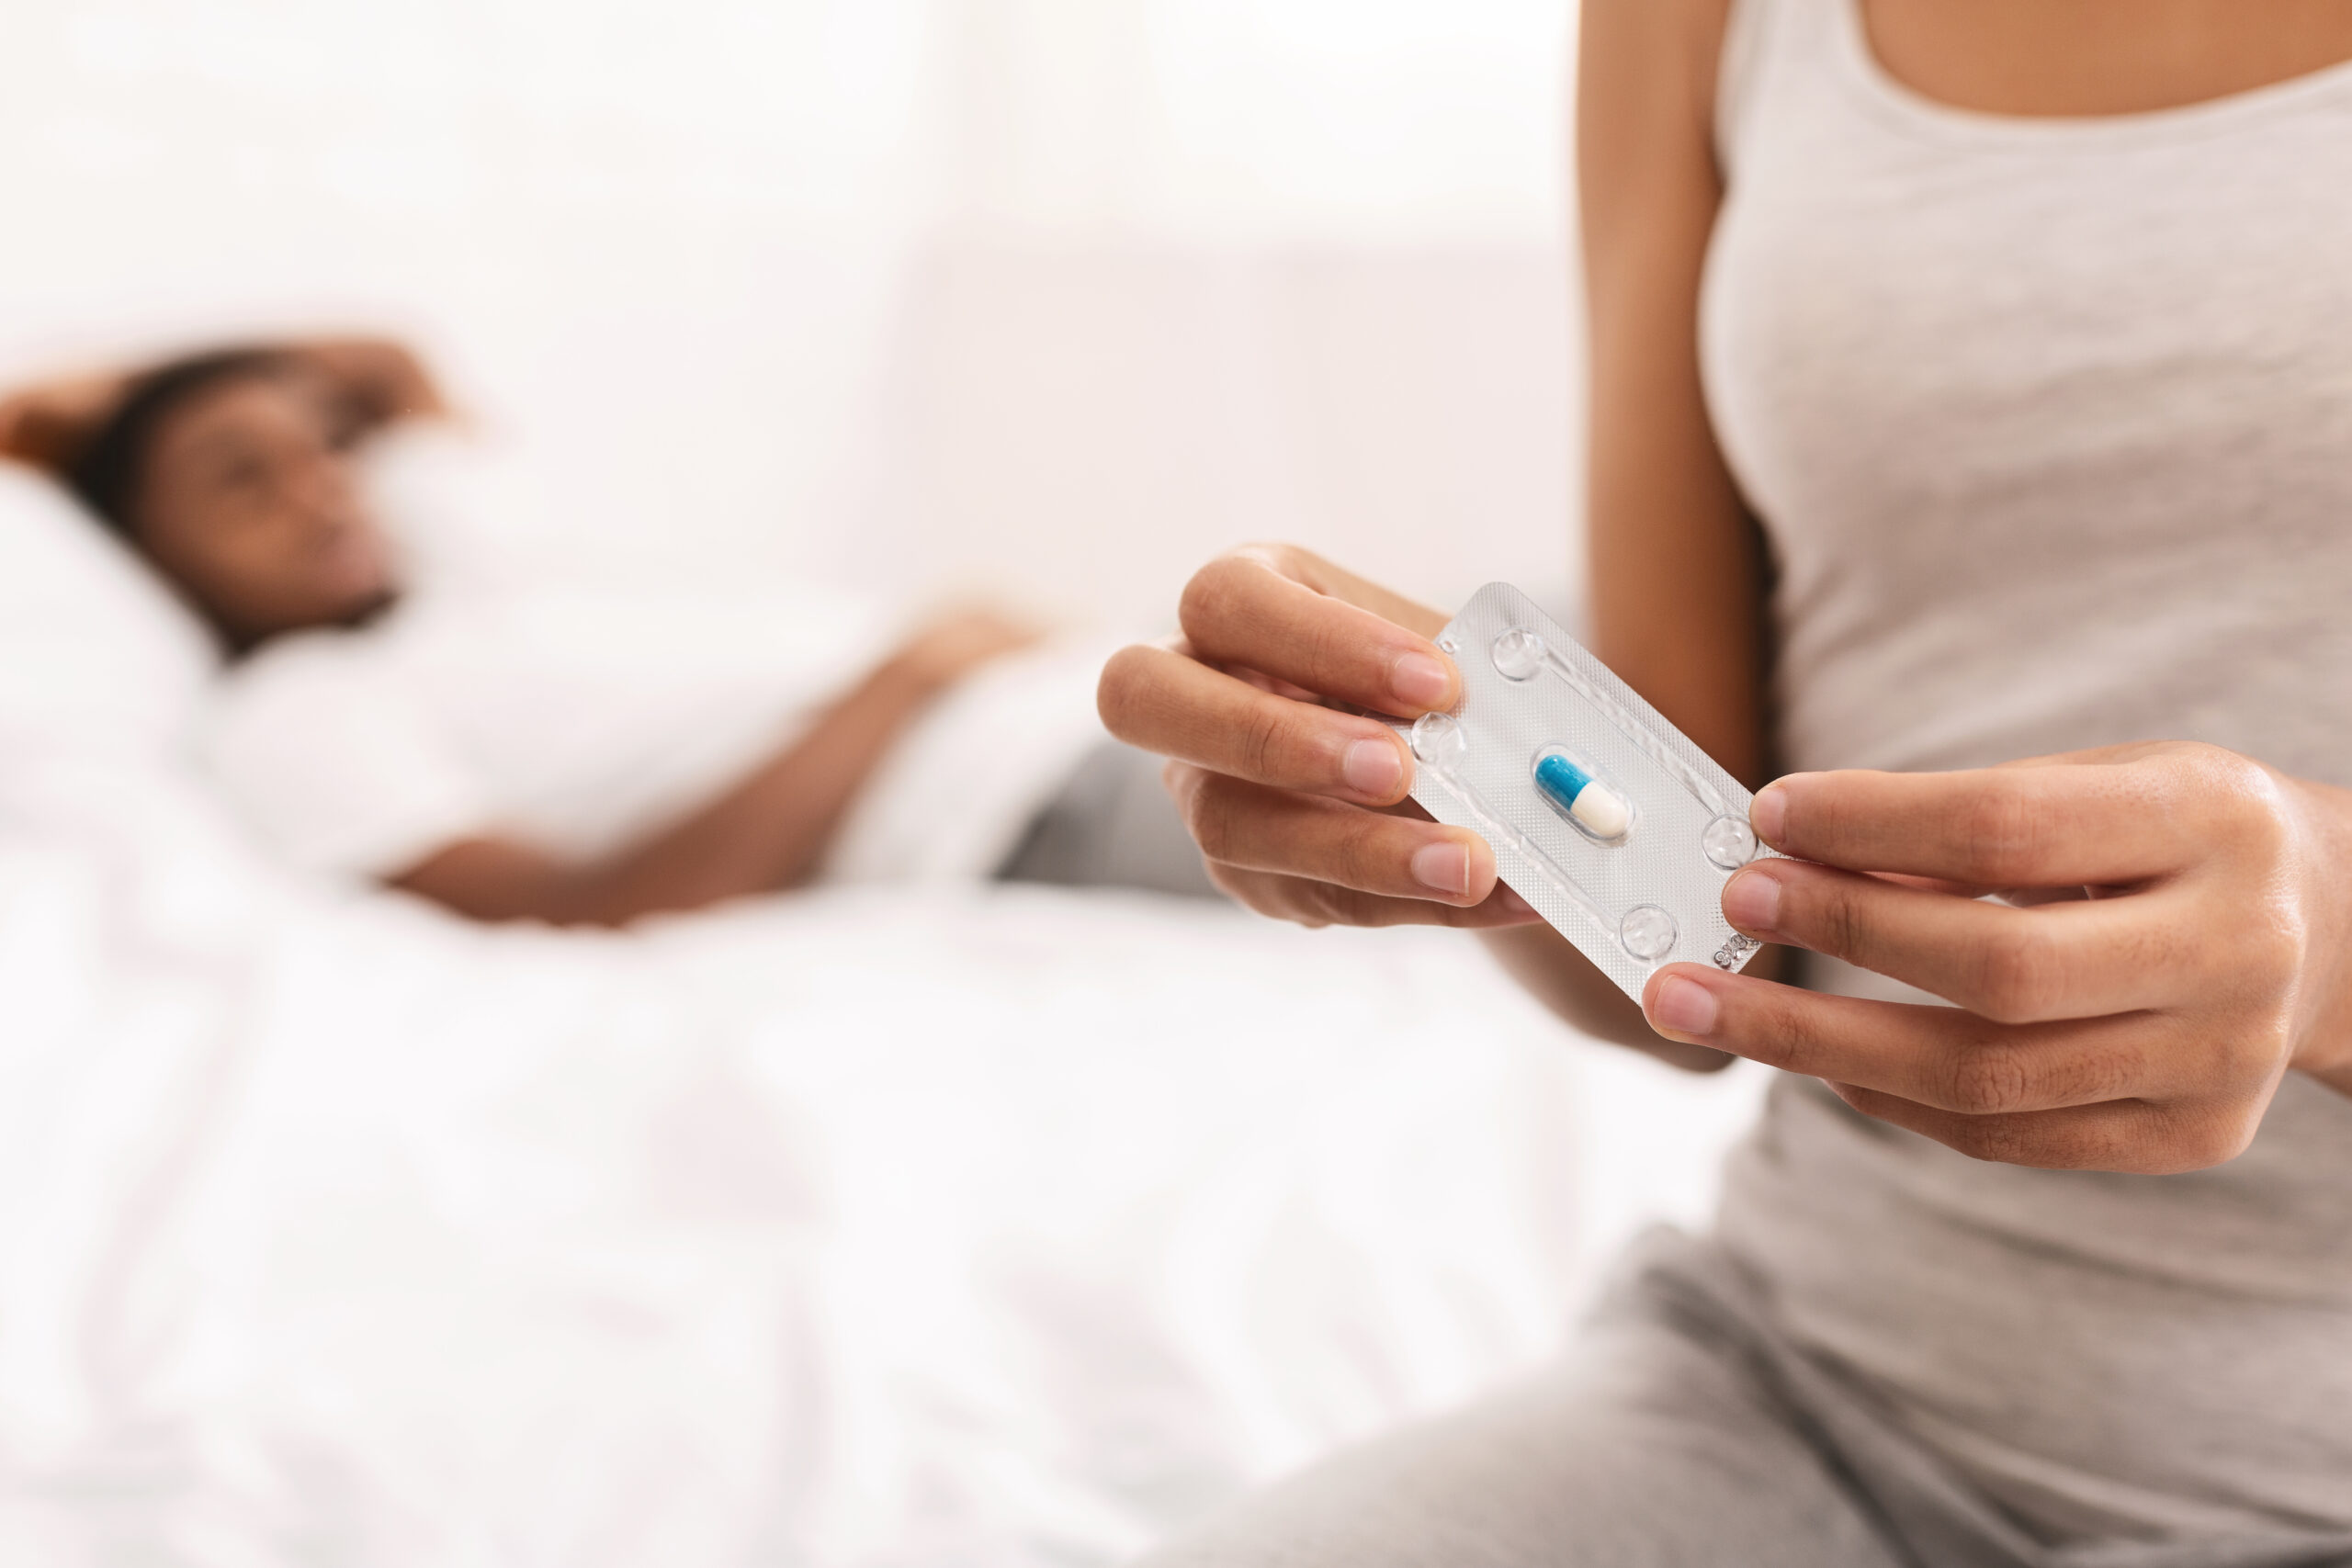 Emergency contraception (EC), also known as the "morning-after pill," is a method of contraception used to prevent pregnancy after unprotected sexual intercourse